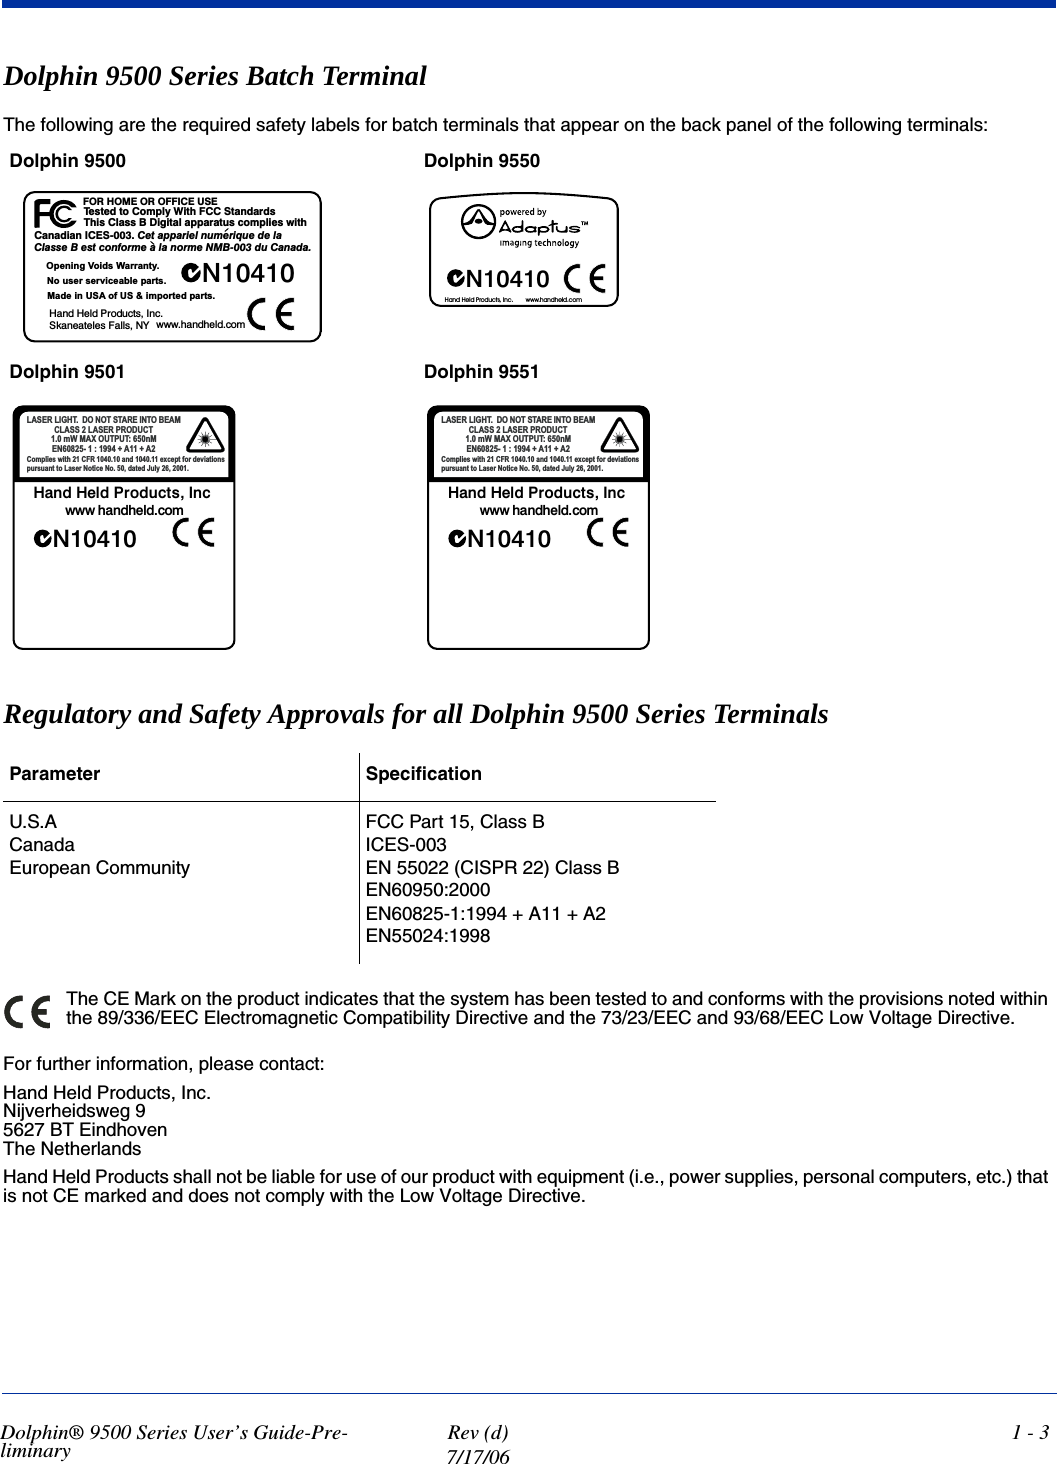 Dolphin® 9500 Series User’s Guide-Pre-liminary Rev (d)7/17/061 - 3Dolphin 9500 Series Batch Terminal The following are the required safety labels for batch terminals that appear on the back panel of the following terminals: Regulatory and Safety Approvals for all Dolphin 9500 Series Terminals The CE Mark on the product indicates that the system has been tested to and conforms with the provisions noted within the 89/336/EEC Electromagnetic Compatibility Directive and the 73/23/EEC and 93/68/EEC Low Voltage Directive.For further information, please contact:Hand Held Products, Inc.Nijverheidsweg 95627 BT EindhovenThe NetherlandsHand Held Products shall not be liable for use of our product with equipment (i.e., power supplies, personal computers, etc.) that is not CE marked and does not comply with the Low Voltage Directive.Dolphin 9500  Dolphin 9550Dolphin 9501 Dolphin 9551Parameter SpecificationU.S.ACanadaEuropean CommunityFCC Part 15, Class BICES-003EN 55022 (CISPR 22) Class BEN60950:2000EN60825-1:1994 + A11 + A2EN55024:1998VGUDGQDW6&amp;&amp;)KWL:\OSPR&amp;RWGHWVH7KWLZVHLOSPRFVXWDUDSSDODWLJL&apos;%VVDO&amp;VLK7(68(&amp;,))252(02+52)6(&amp;,QDLGDQD&amp; DOHGHXTLUHPXQOHLUDSSDWH&amp;DGDQD&amp;XG%01HPURQDODHPURIQRFWVH%HVVDO&amp;1FQ,VWFXGRU3GOH+GQD+&lt;1VOOD)VHOHWDHQDN6VWUDSGHWURSPL68IR$68QLHGD0VWUDSHOEDHFLYUHVUHVXR1\WQDUUD:VGLR9JQLQHS2PRFGOHKGQDKZZZ1+DQG+HOG3URGXFWV,QF ZZZKDQGKHOGFRP1FQ,VWFXGRU3GOH+GQD+PRFGOHKGQDKZZZVQRLWDLYHGURIWSHF[HGQD5)&amp;KWLZVHLOSPR&amp;\OX-GHWDGR1HFLWR1UHVD/RWWQDXVUXS7+*,/5(6$/ 0$(%271,(5$767212&apos;0Q783782;$0:P$$1(7&amp;8&apos;2535(6$/66$/&amp;1FQ,VWFXGRU3GOH+GQD+PRFGOHKGQDKZZZVQRLWDLYHGURIWSHF[HGQD5)&amp;KWLZVHLOSPR&amp;\OX-GHWDGR1HFLWR1UHVD/RWWQDXVUXS7+*,/5(6$/ 0$(%271,(5$767212&apos;0Q783782;$0:P$$1(7&amp;8&apos;2535(6$/66$/&amp;